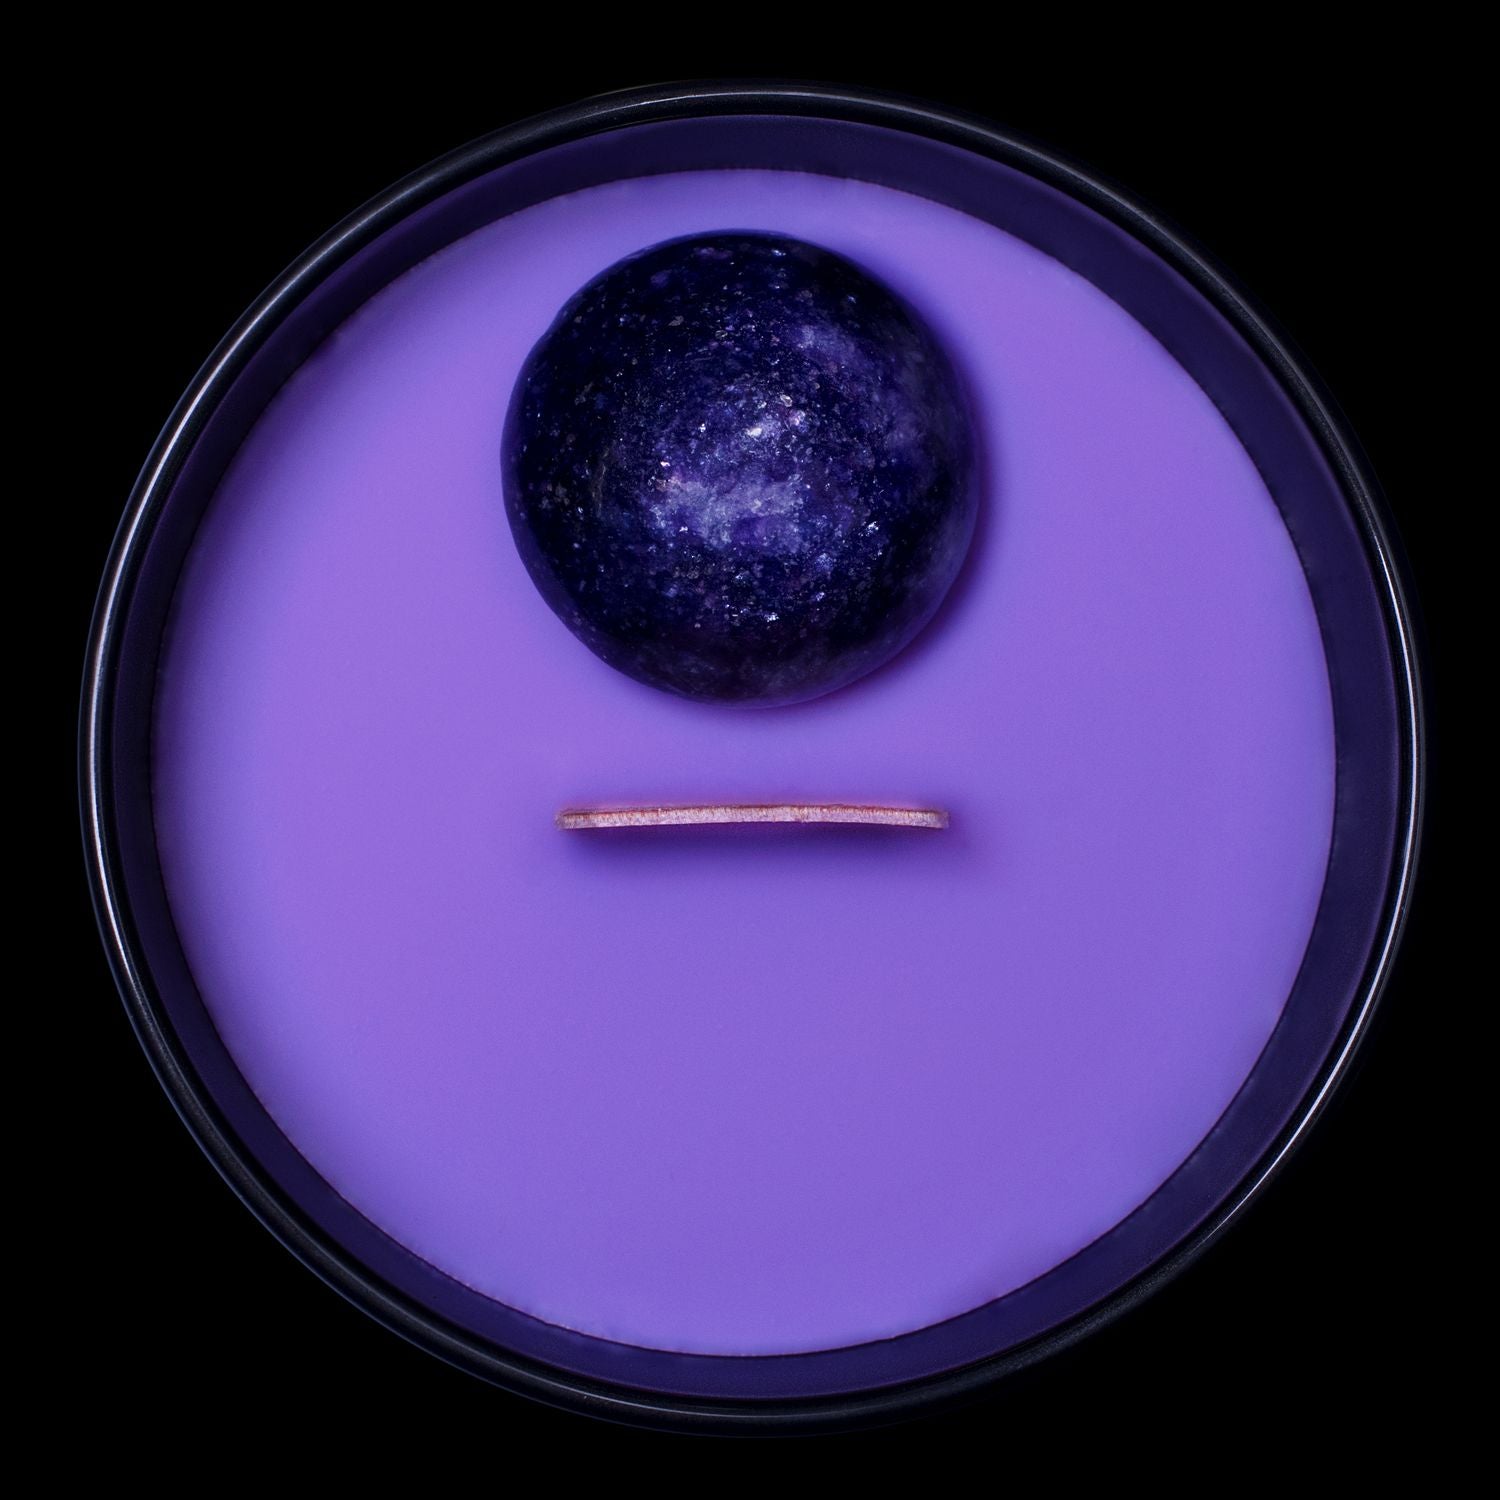 Birds Eye View Of The Naturally Wicked Hypnotwist Create Candle Featuring Plant-based Soy Purple Wax Scented With Performer Violet & Includes A Lepidolite Crystal Spinning Top & Wooden Wick